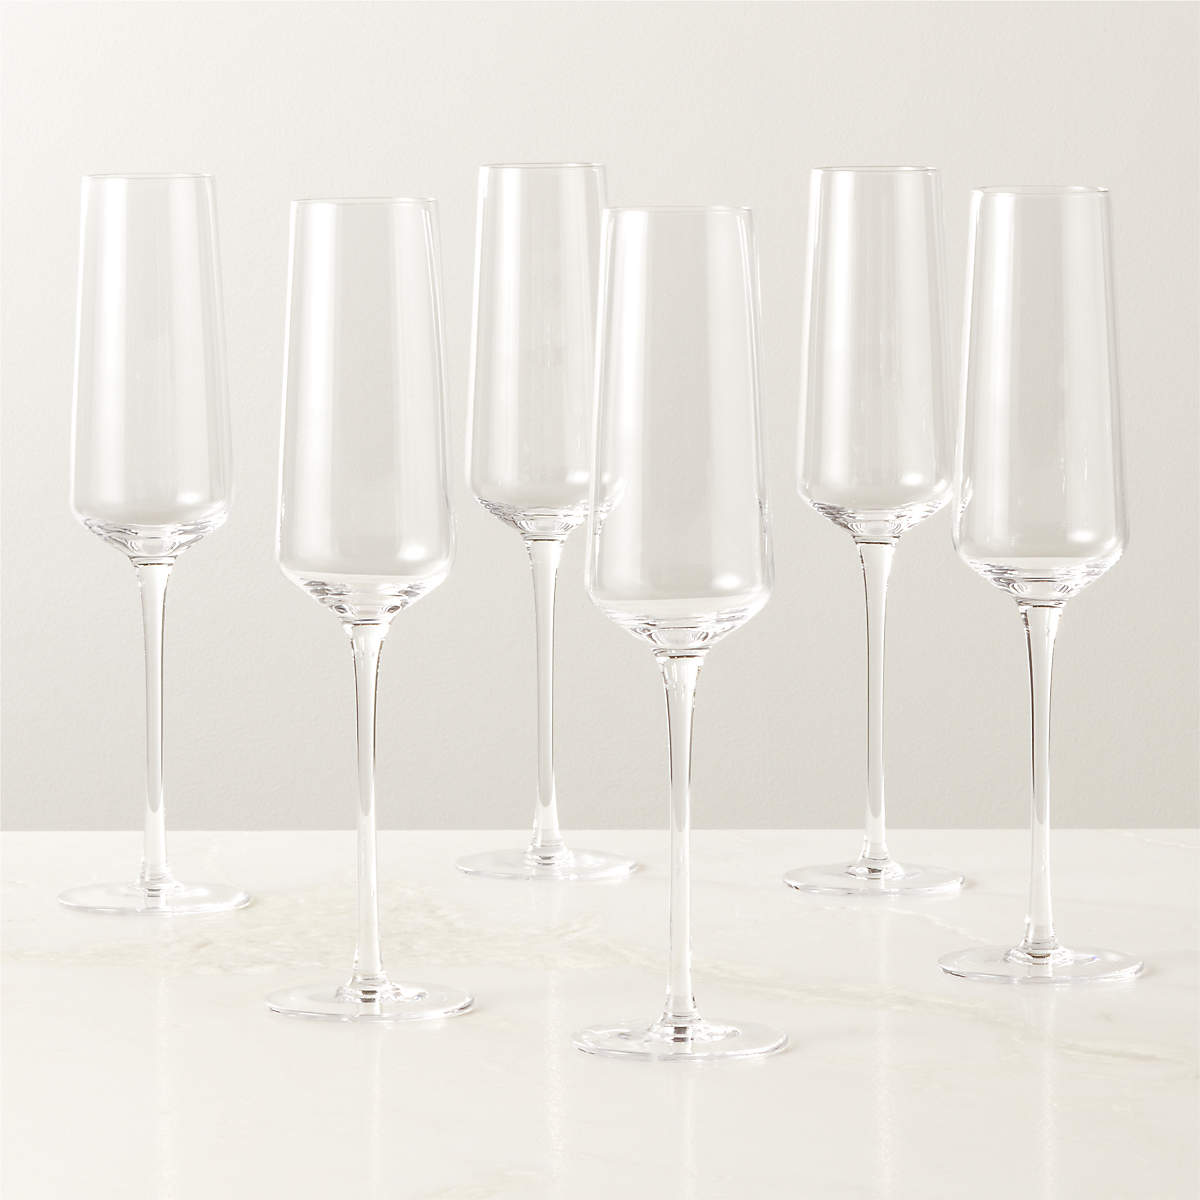 CB2 Muse Modern Champagne Flute Set of 6